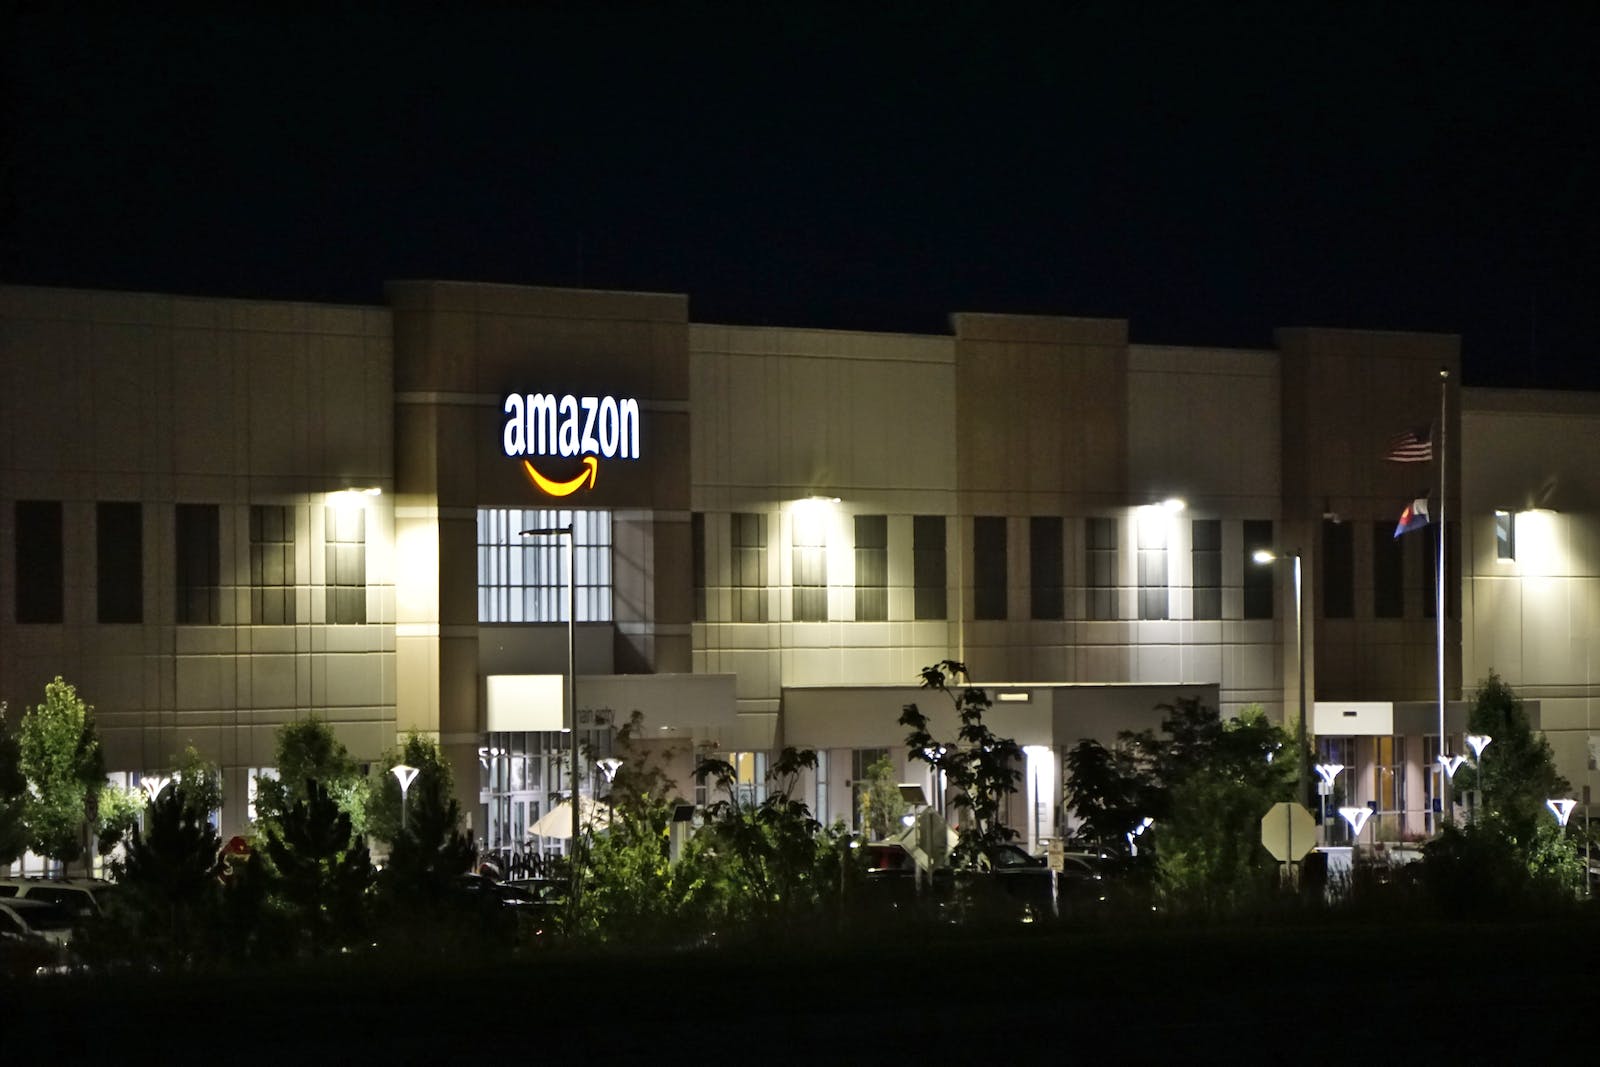 Amazon Concrete Building During Night Time